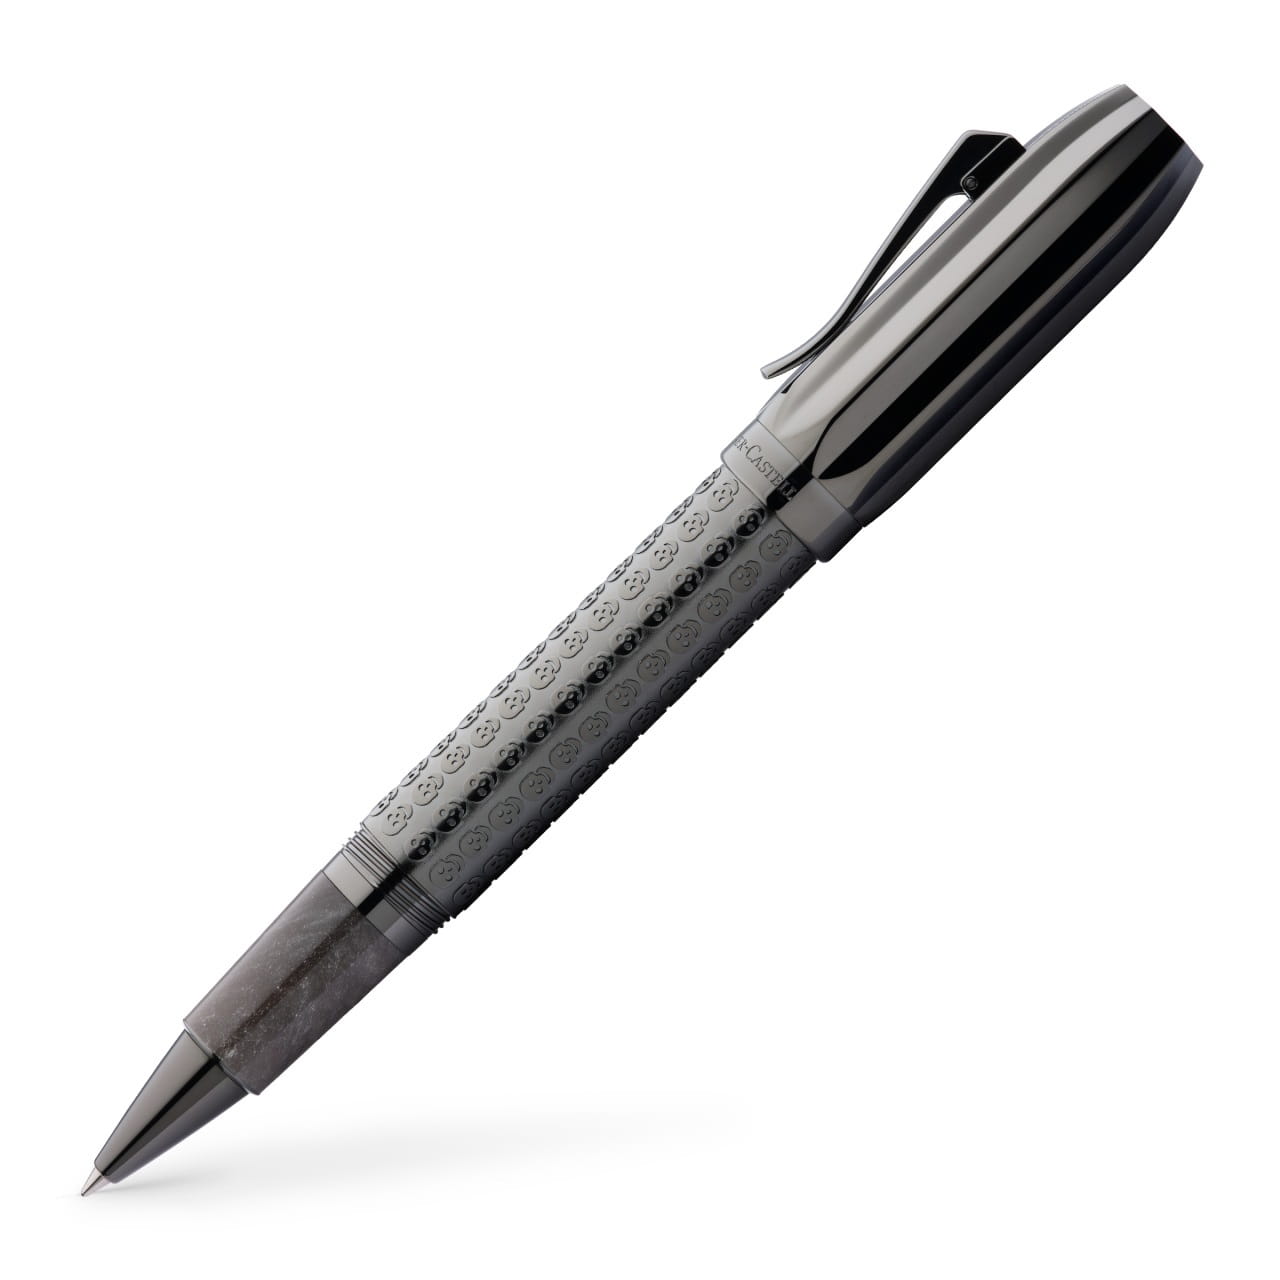 Graf-von-Faber-Castell - Roller Pen of the Year 2022 LE